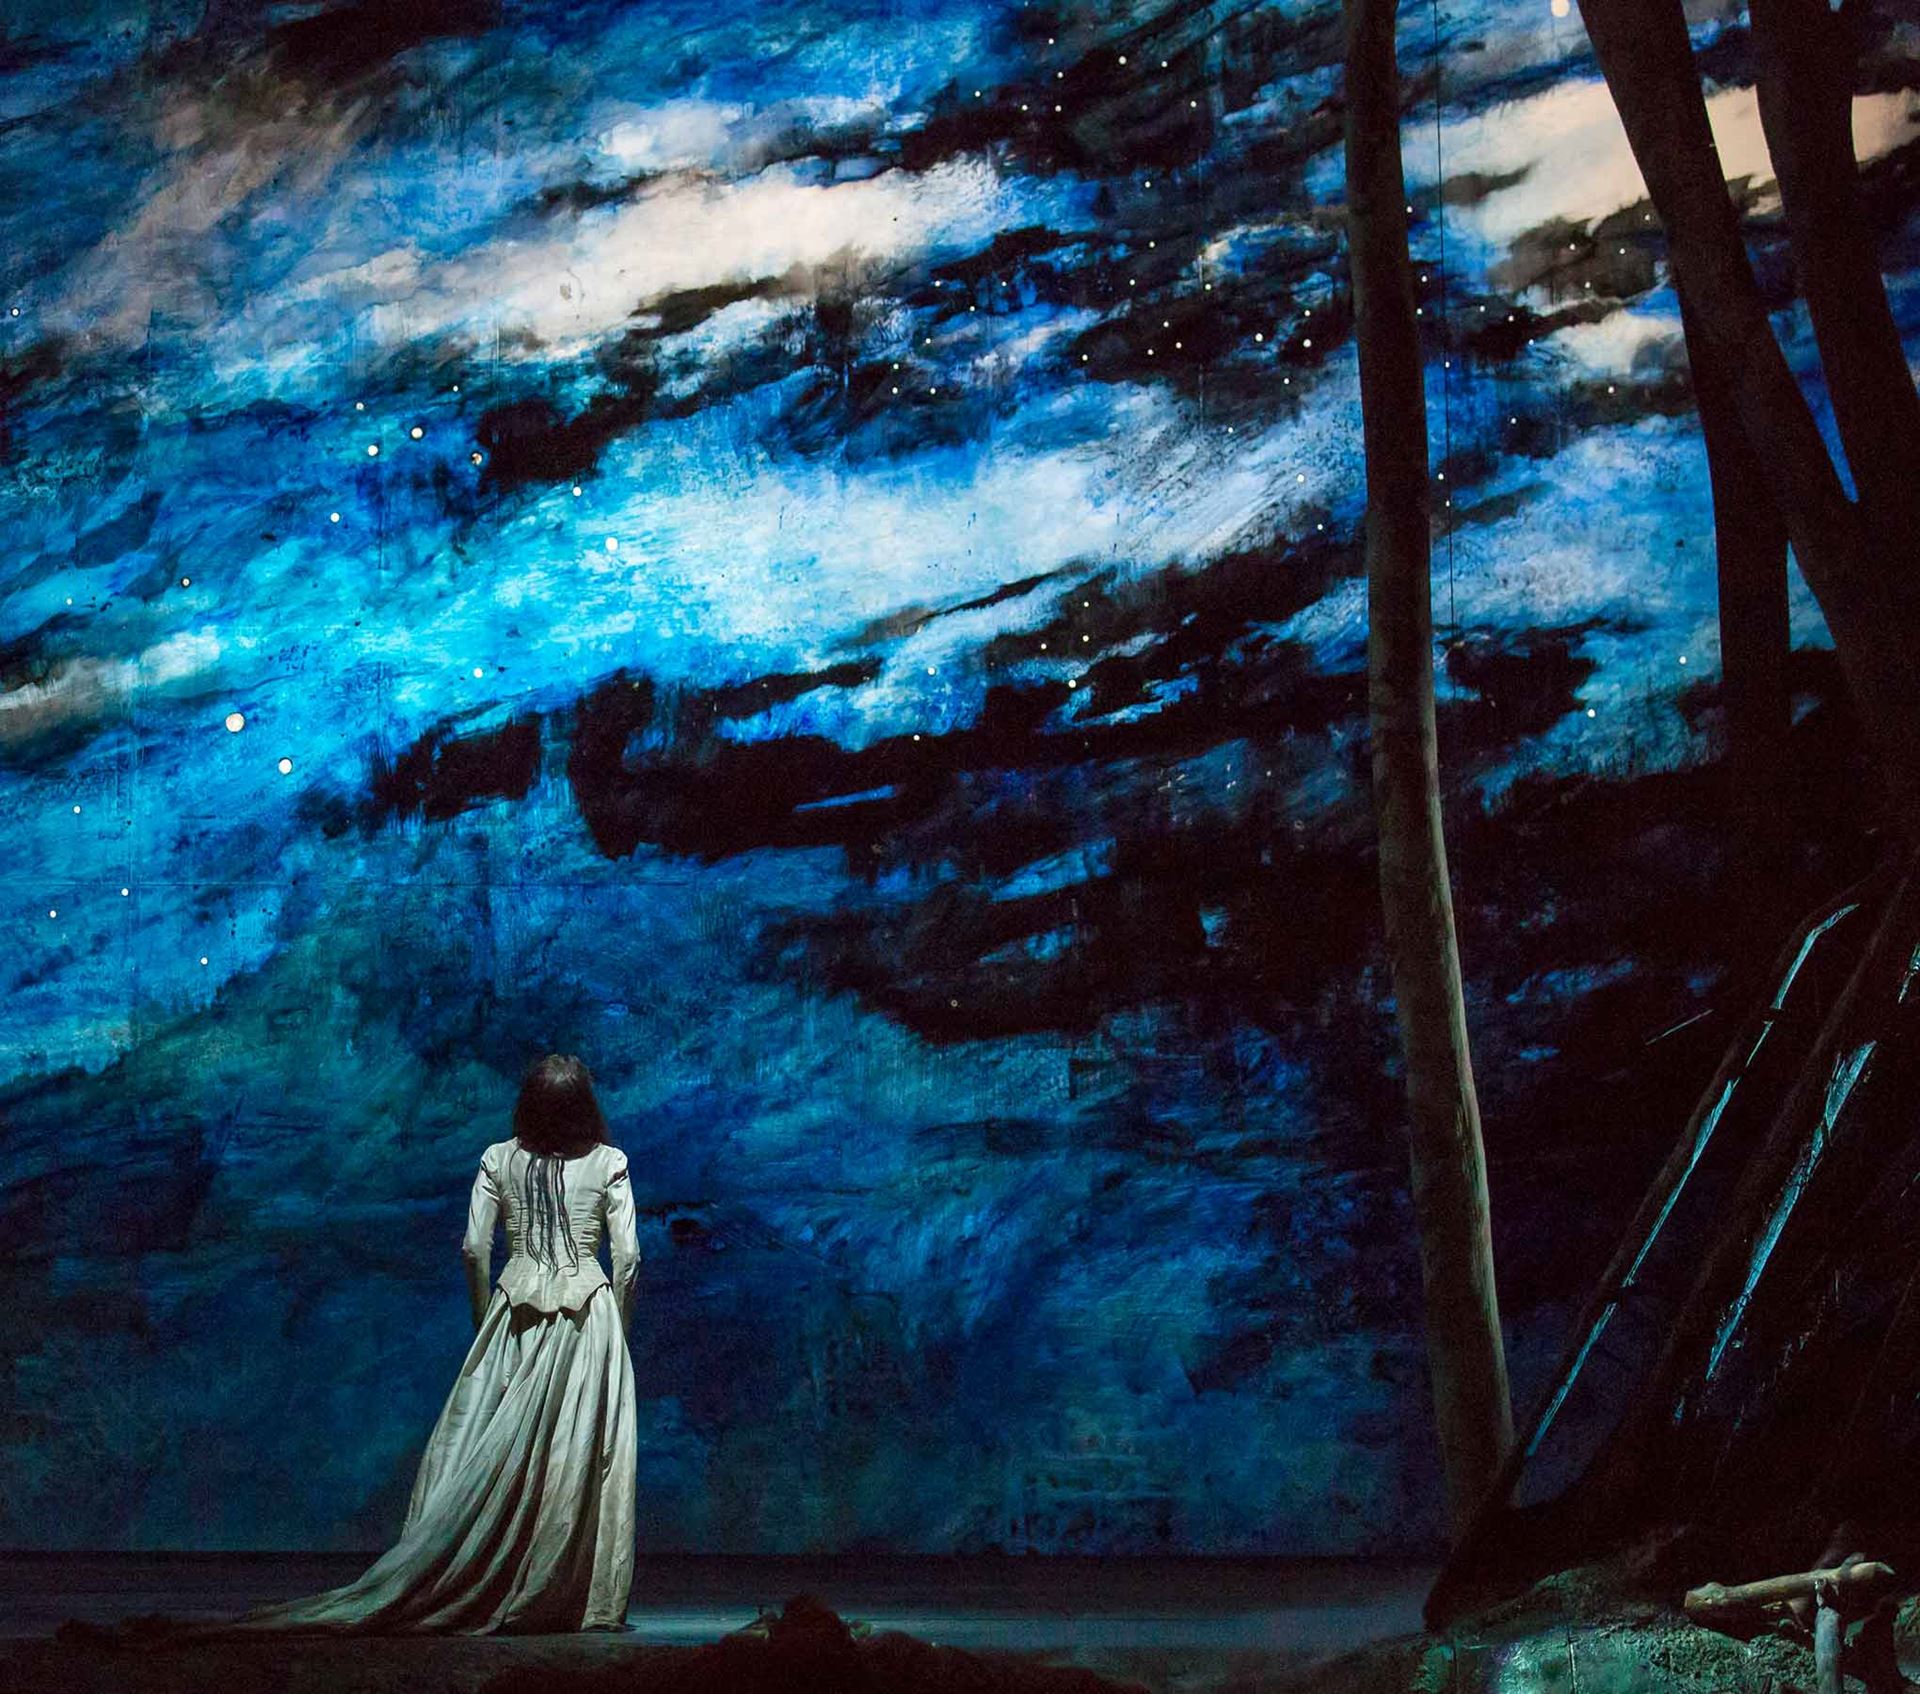 A scene from Rusalka depicted as a painted image with a woman looking at the sky while in the woods.